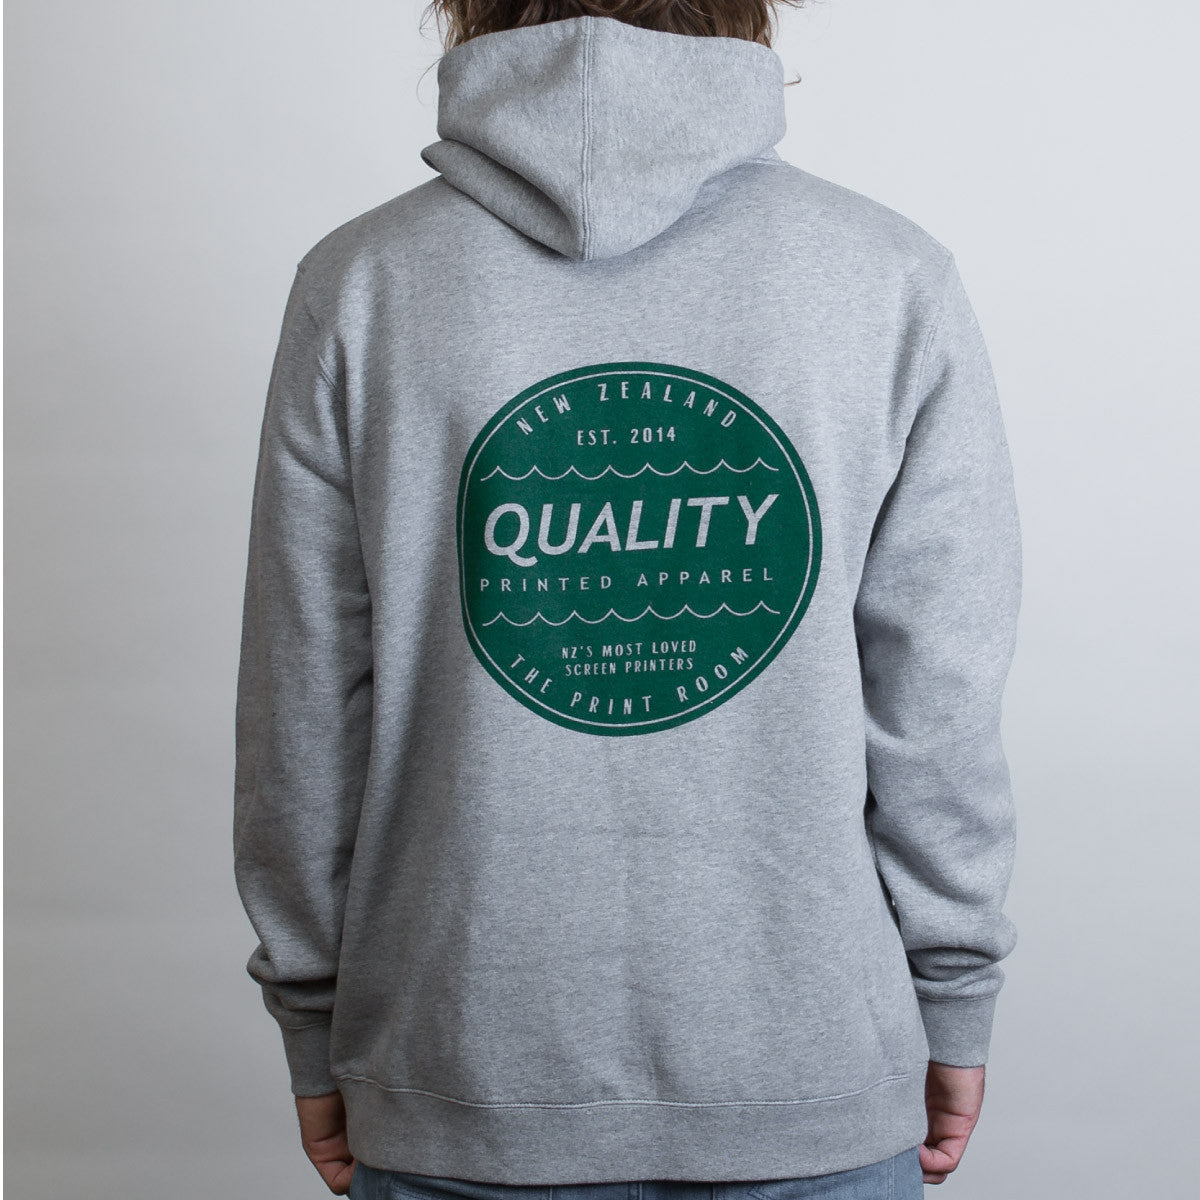 School Leavers Gear - How To: Tips for Designing Your Own Leavers Gear Hoodie